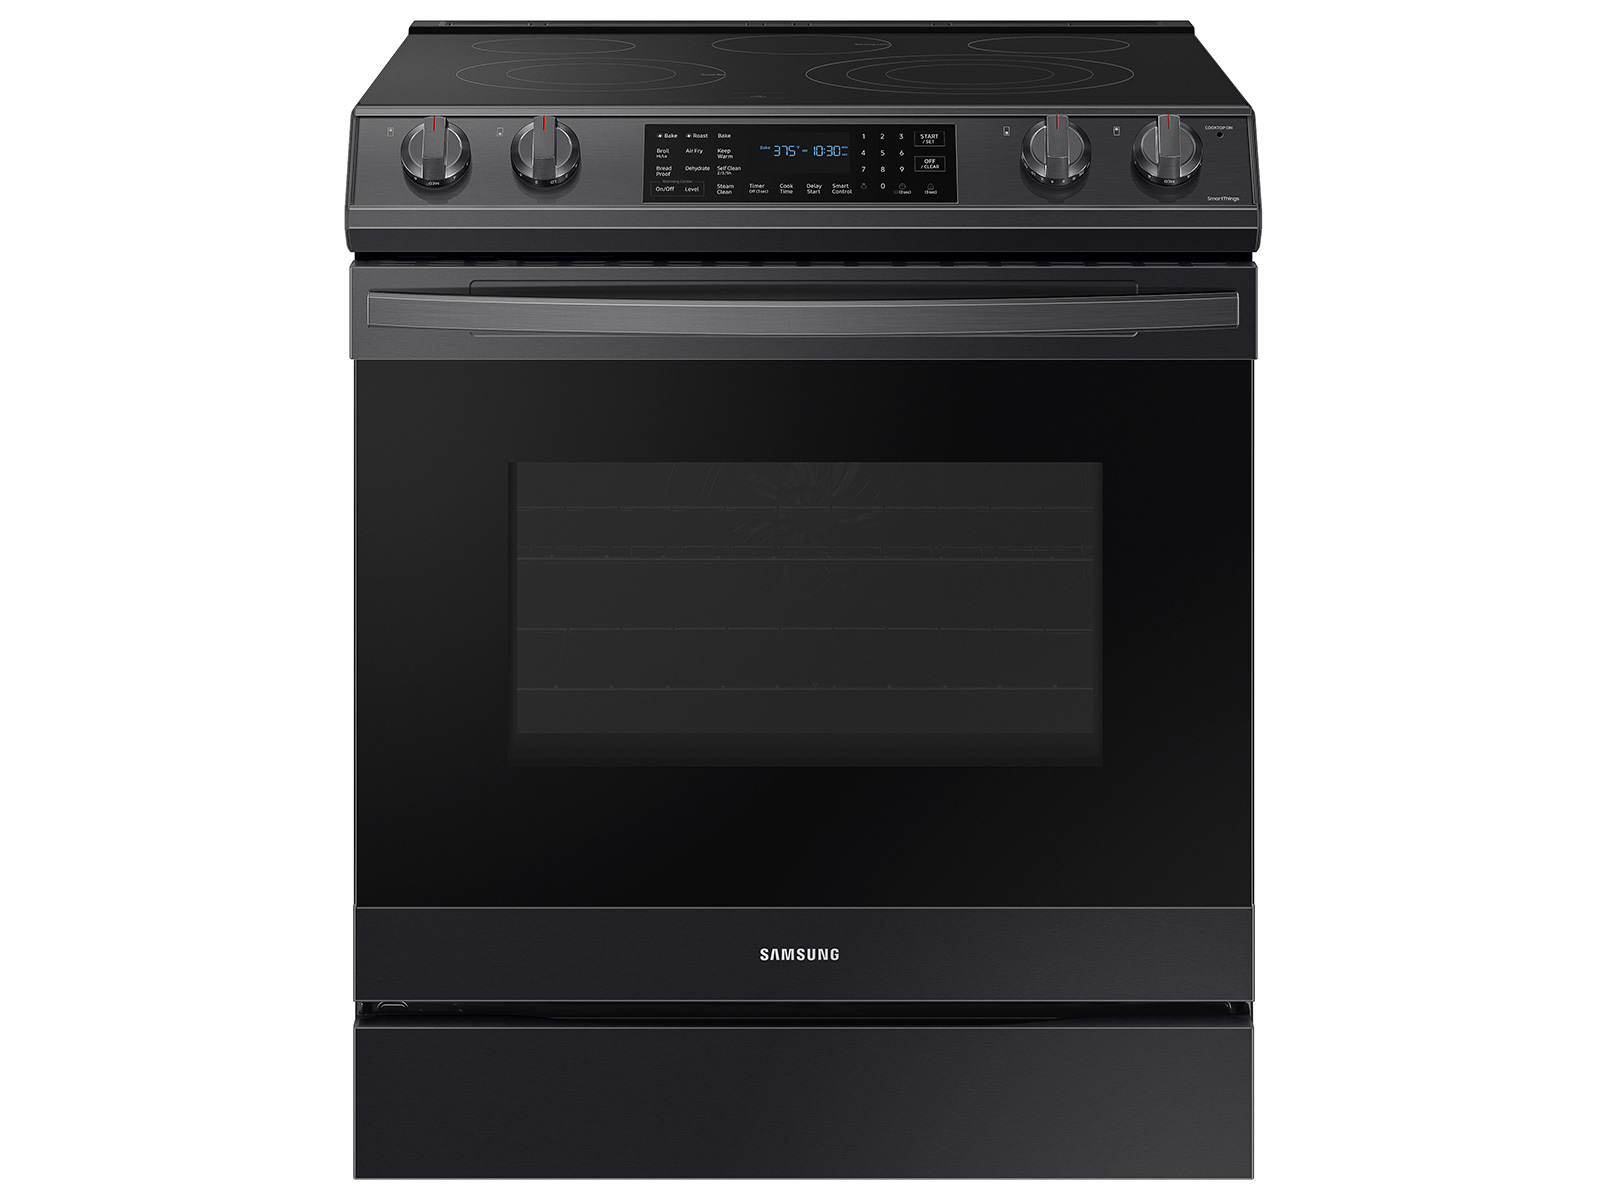 Photos - Cooker Samsung 6.3 cu. ft. Smart Slide-in Electric Range with Air Fry in Black St 